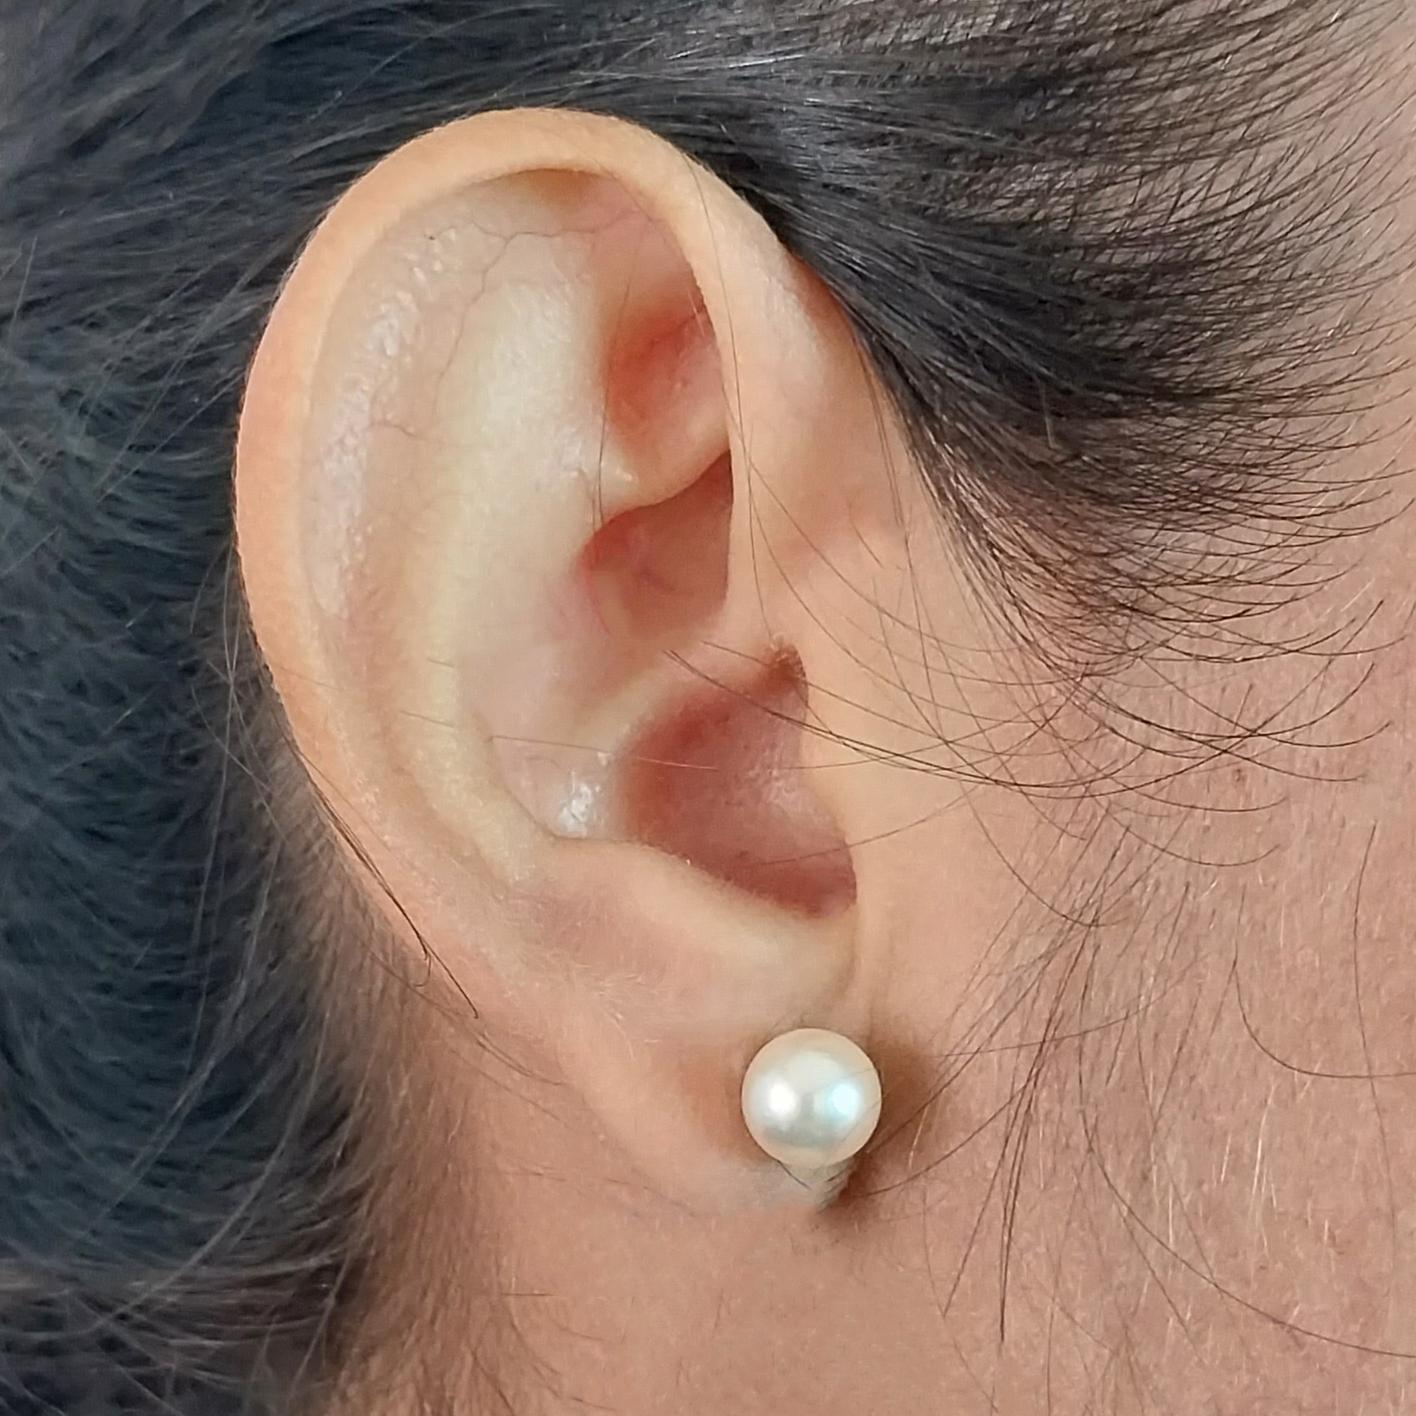 18 Karat Yellow Gold Stud Earrings Featuring Two 7.5mm Cultured Pearls. Pierced Post with Friction Back.